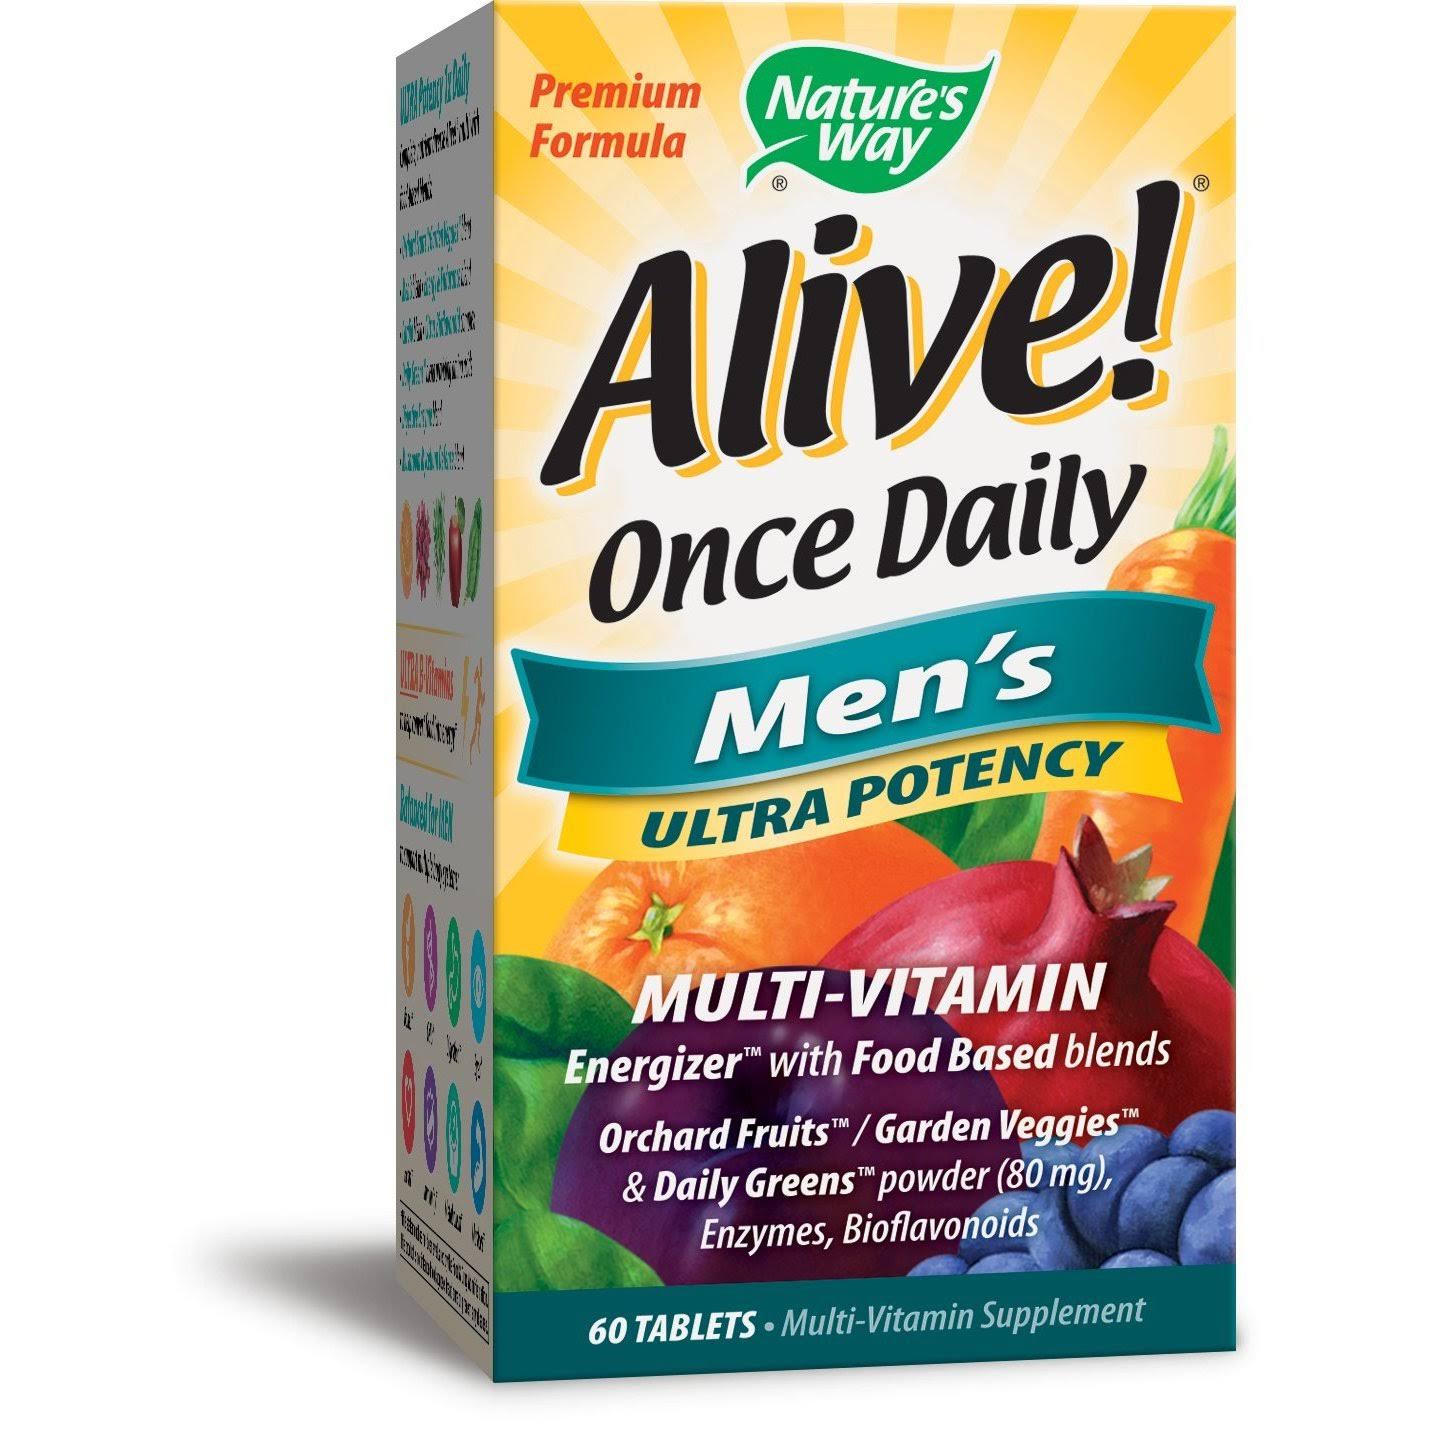 Nature's Way Alive Once Daily Men's Ultra Potency Supplement - 60 Tablets